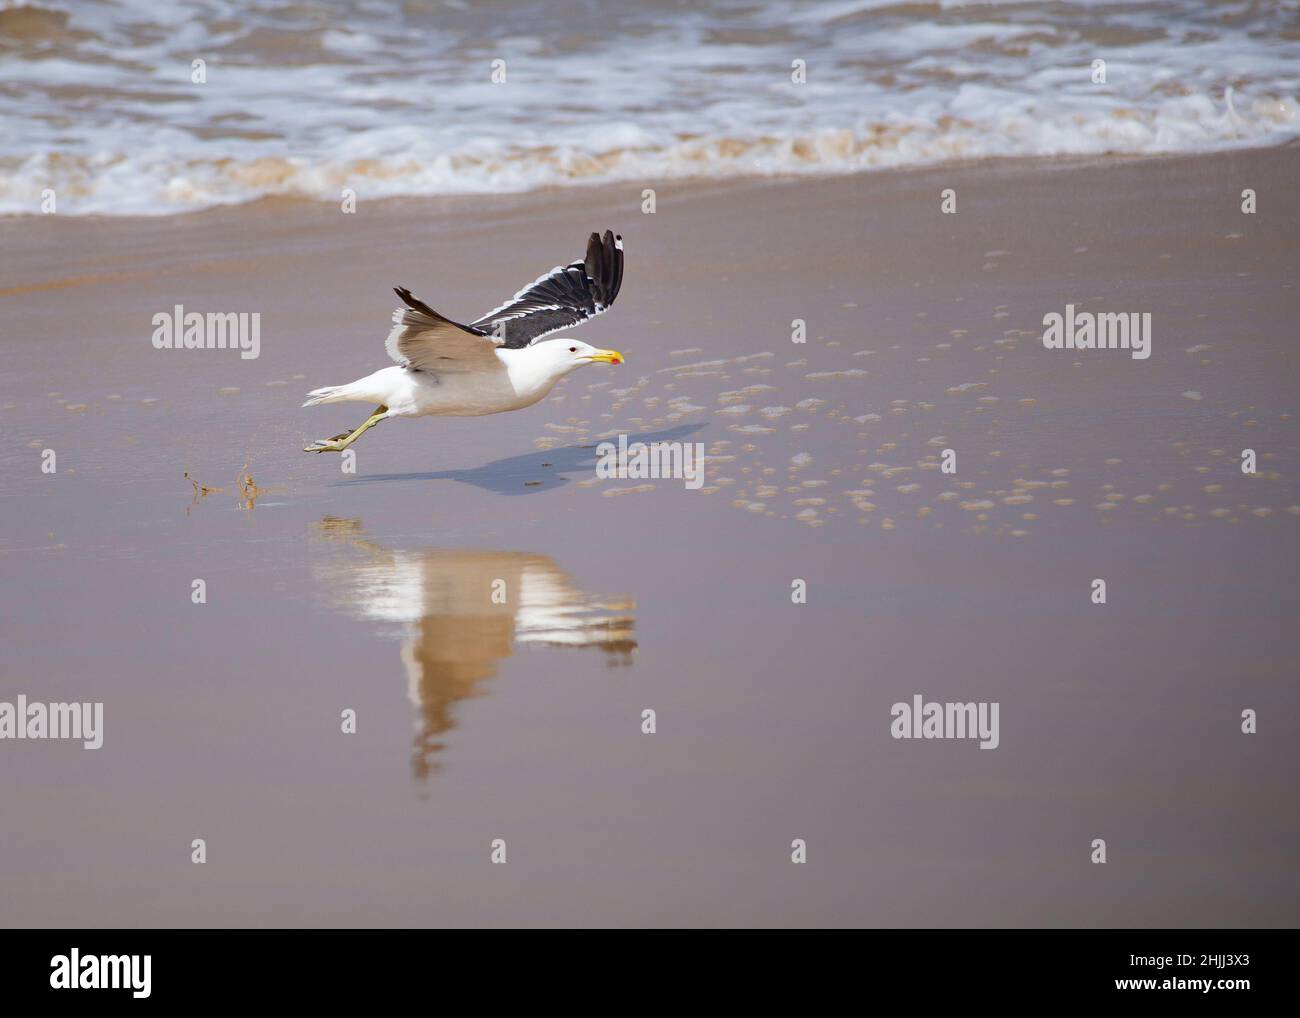 Lone seagull taking off from the sand in front of the waves. Stock Photo